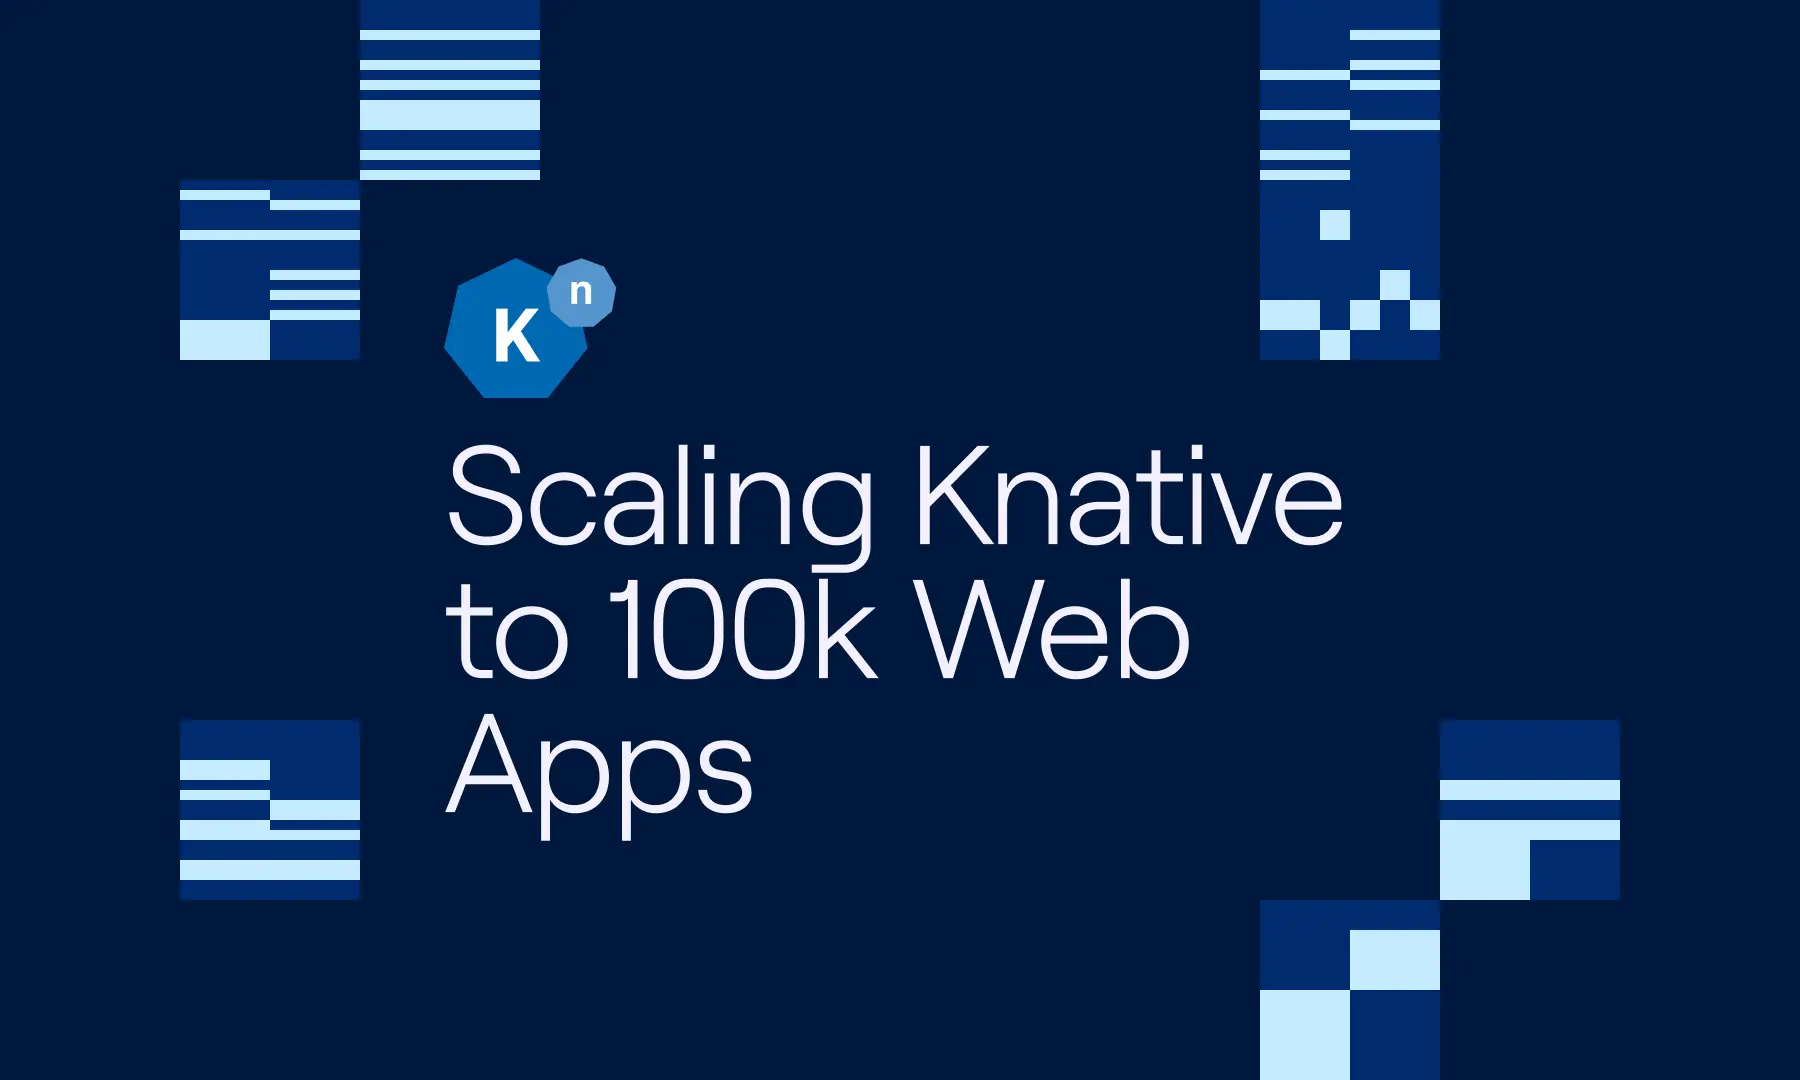 How Render Scaled Knative to 100k+ Web Apps